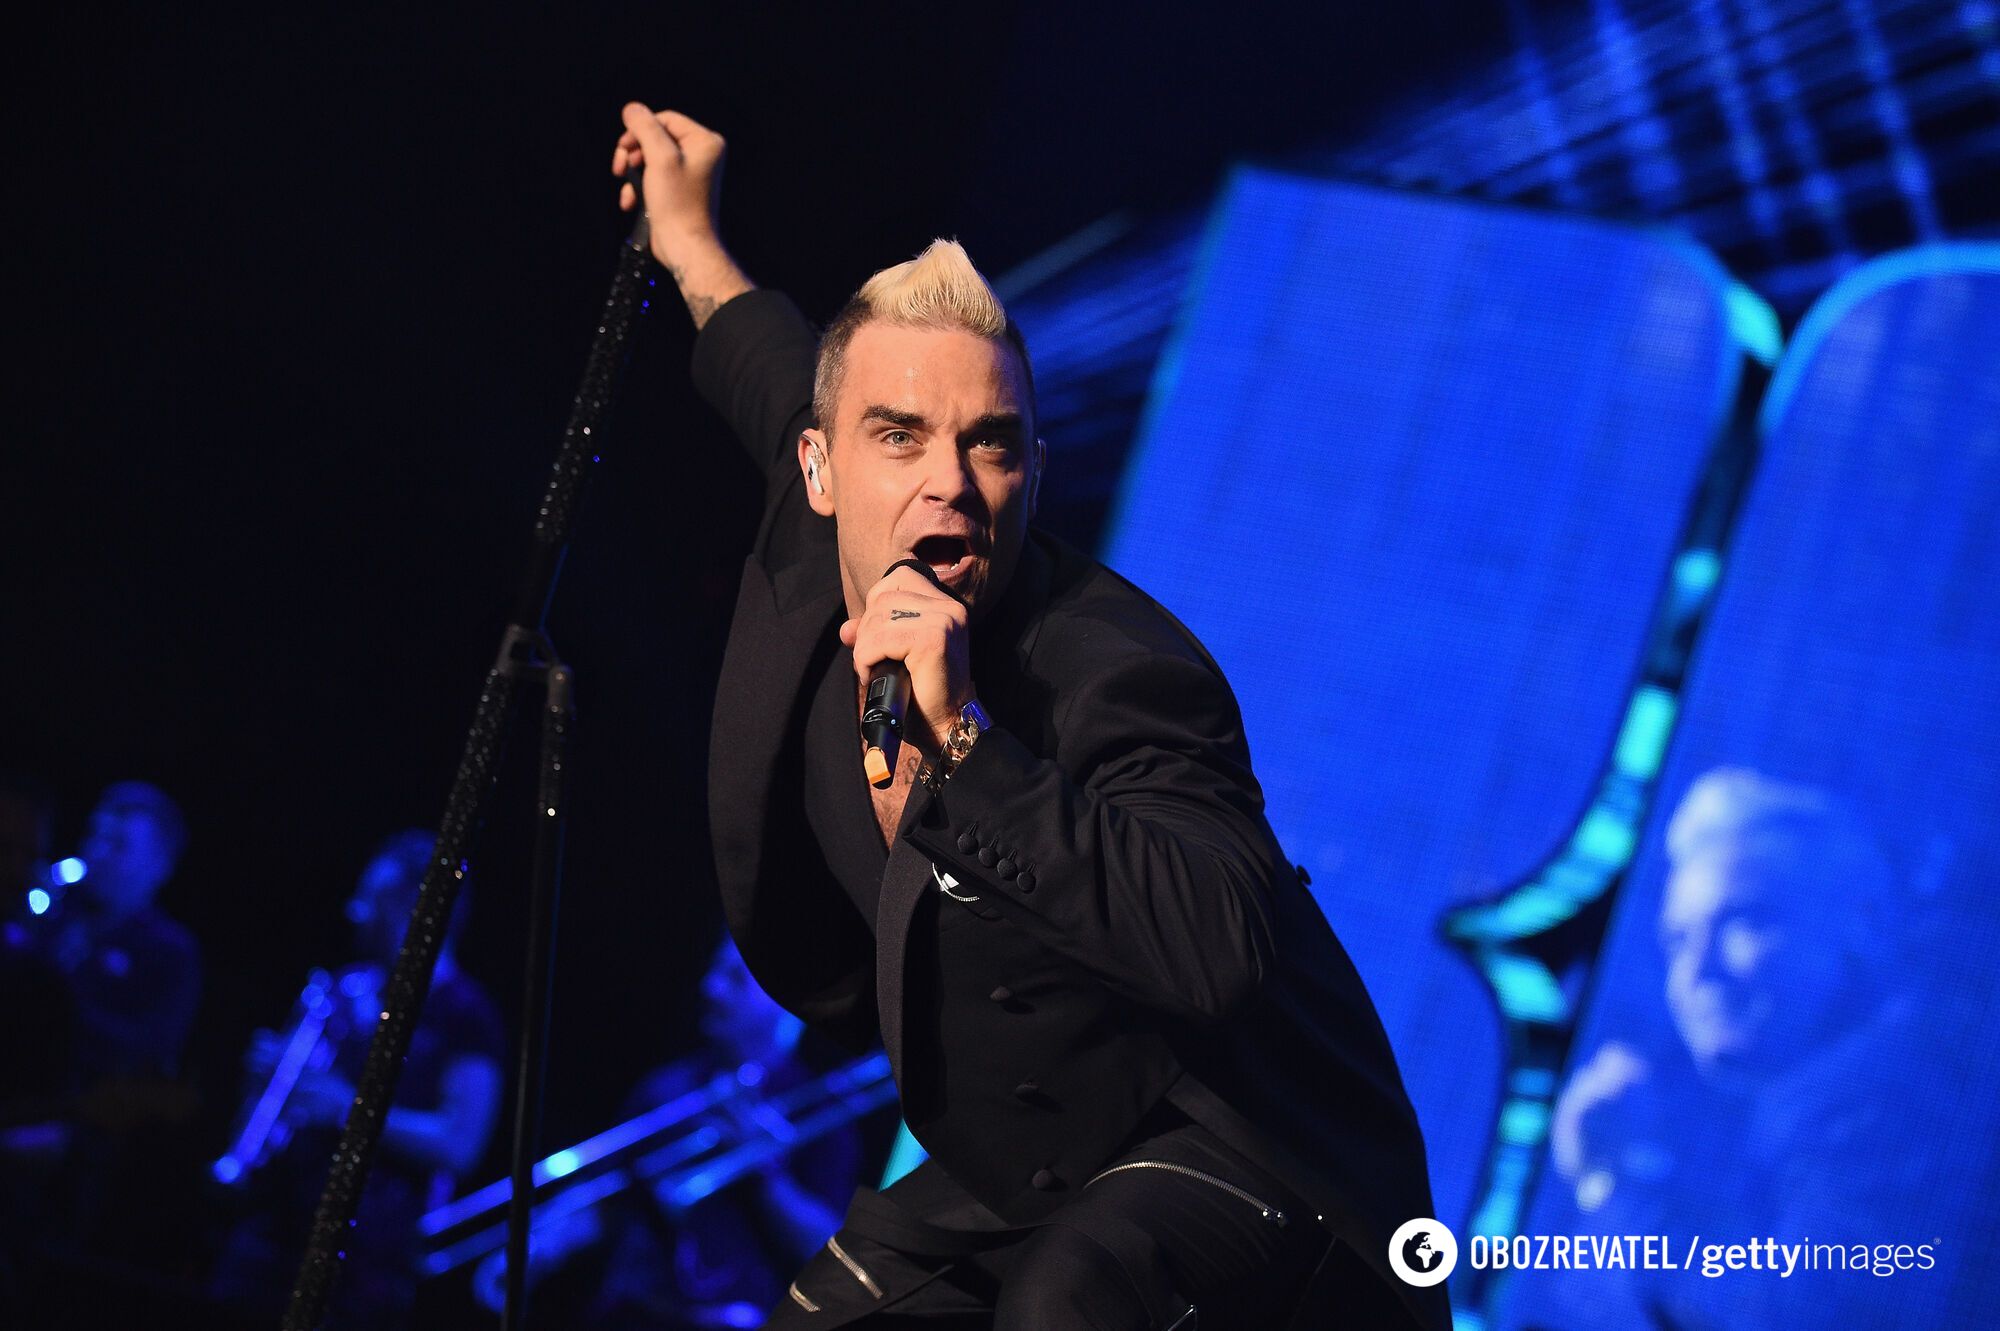 Second death this week: after Robbie Williams' concert, a 70-year-old fan has passed away